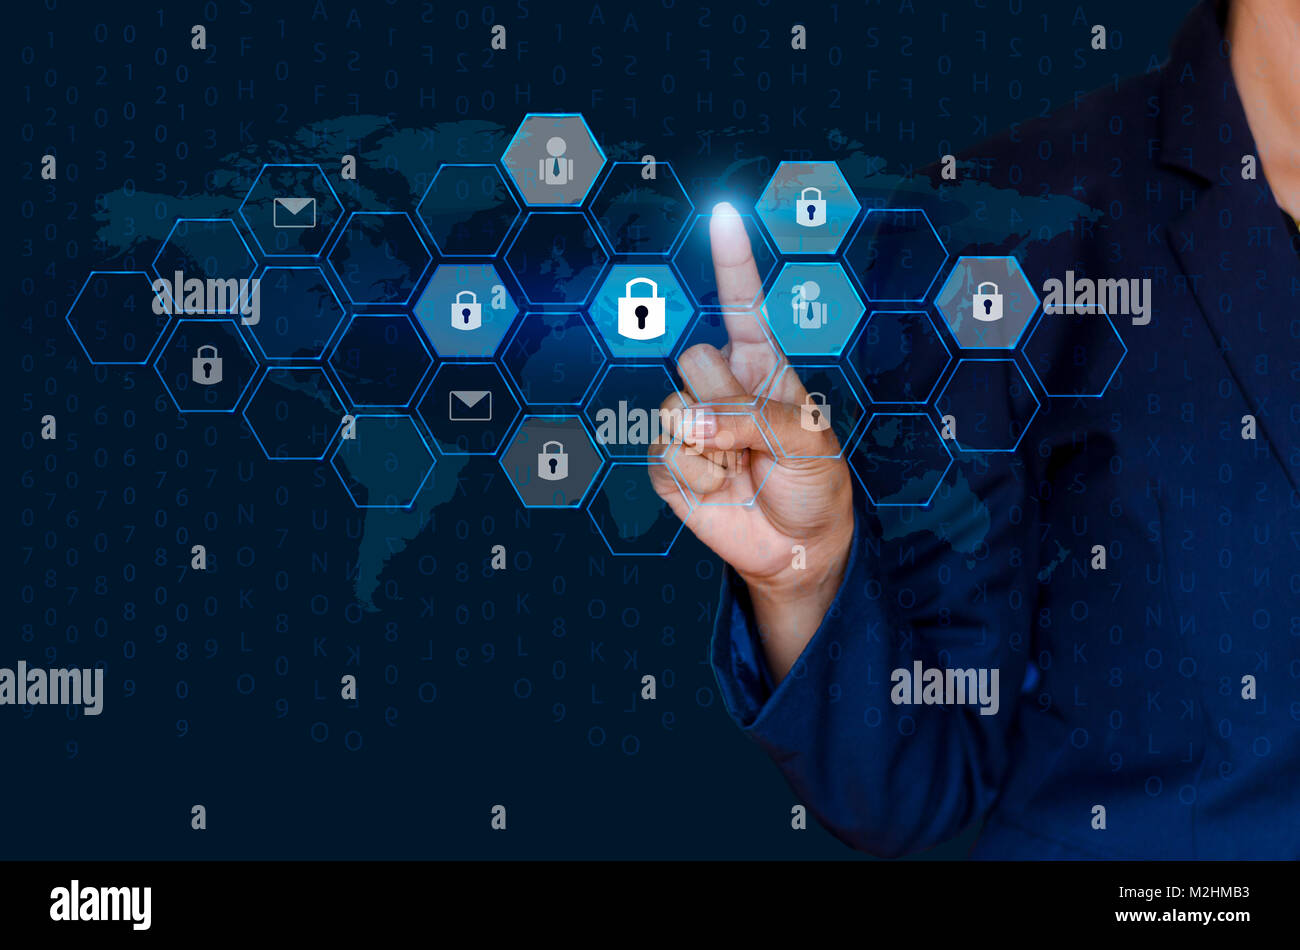 button on virtual screen pressed with finger Global network security world map Key lock security system abstract technology world digital link cyber s Stock Photo